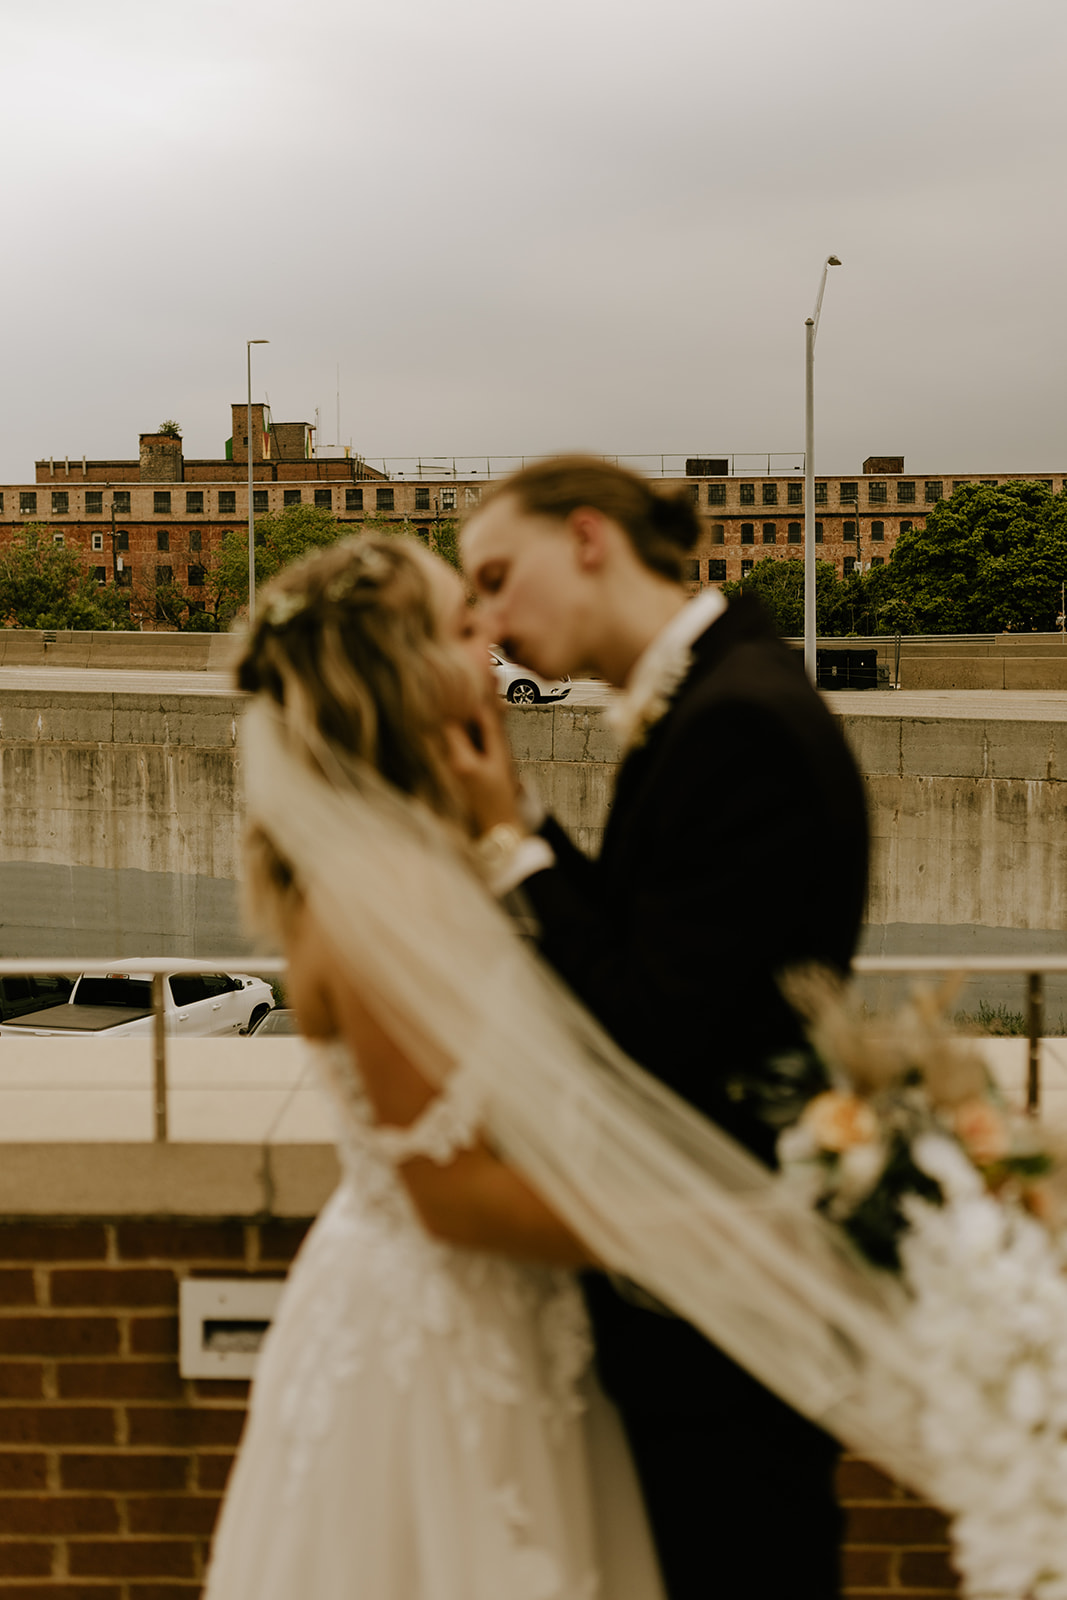 Artistic wedding photos at the Downtown Market greenhouse in Grand Rapids, Michigan